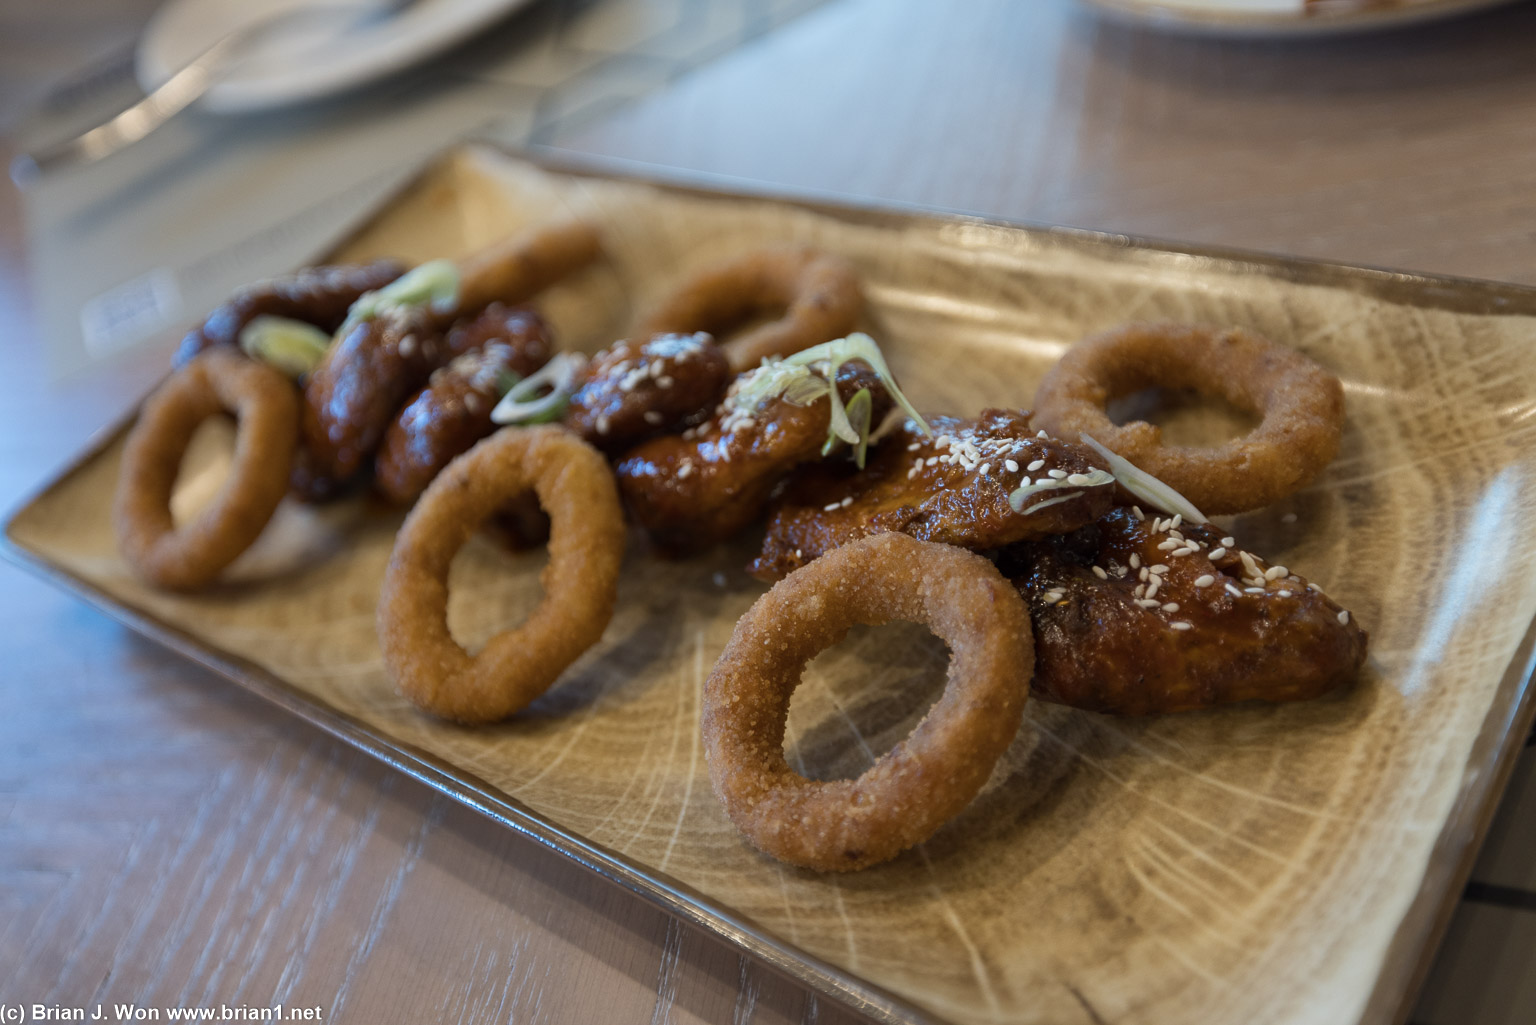 Onion rings and chicken wings back at the hotel.